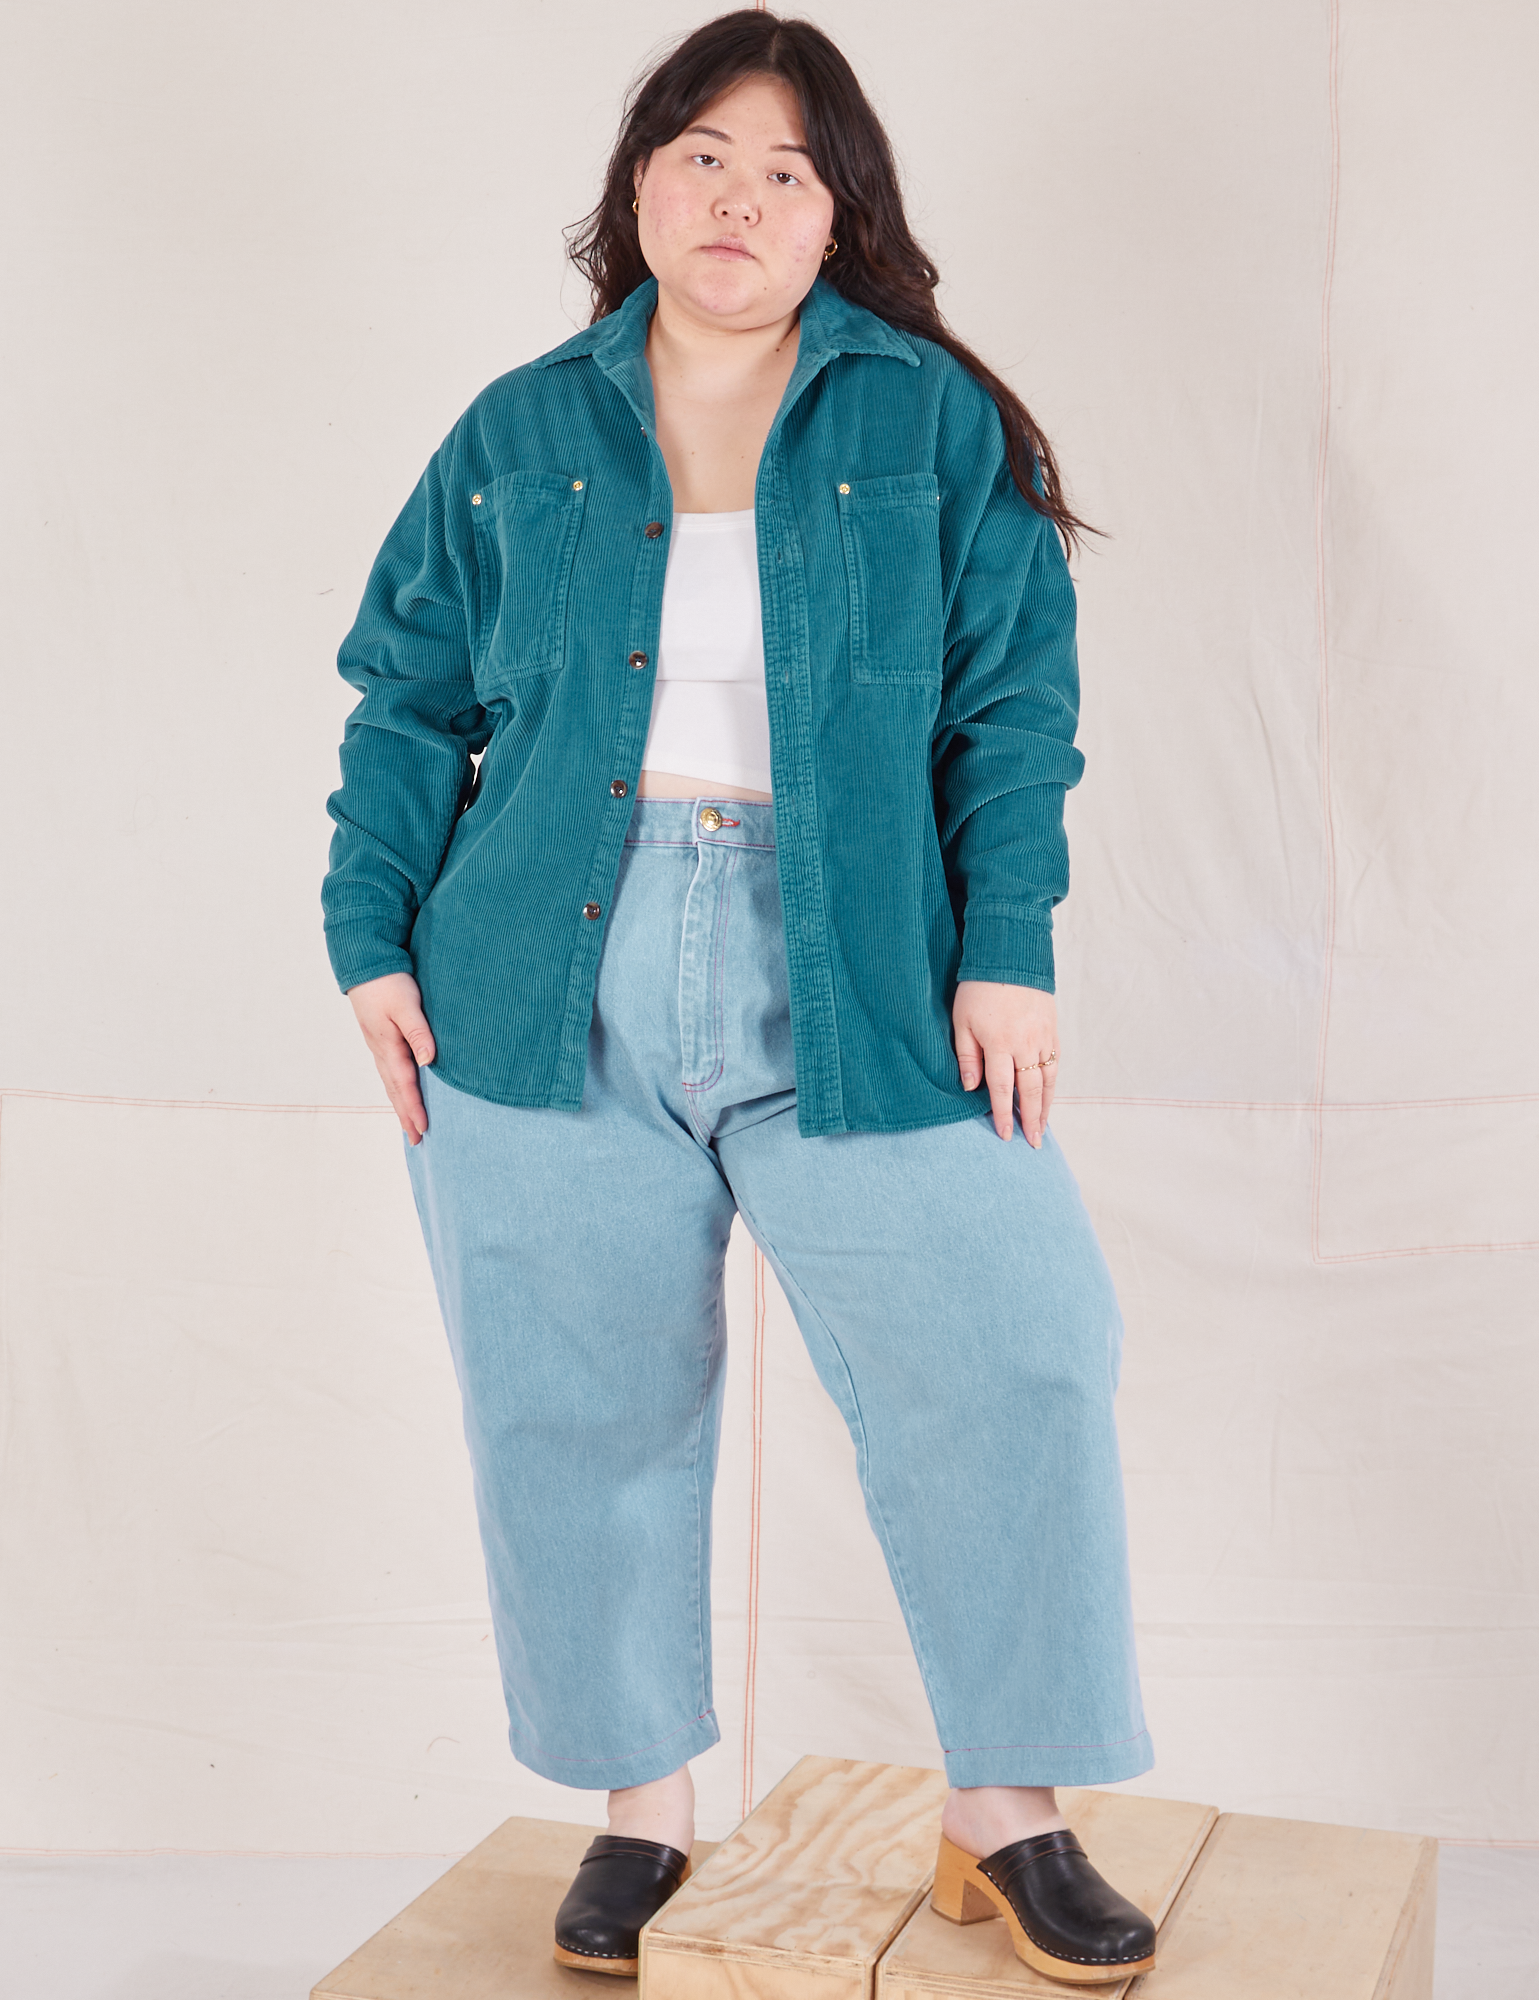 Ashley is wearing Corduroy Overshirt in Marine Blue with a vintage off-white Cami underneath paired with light wash Trouser Jeans